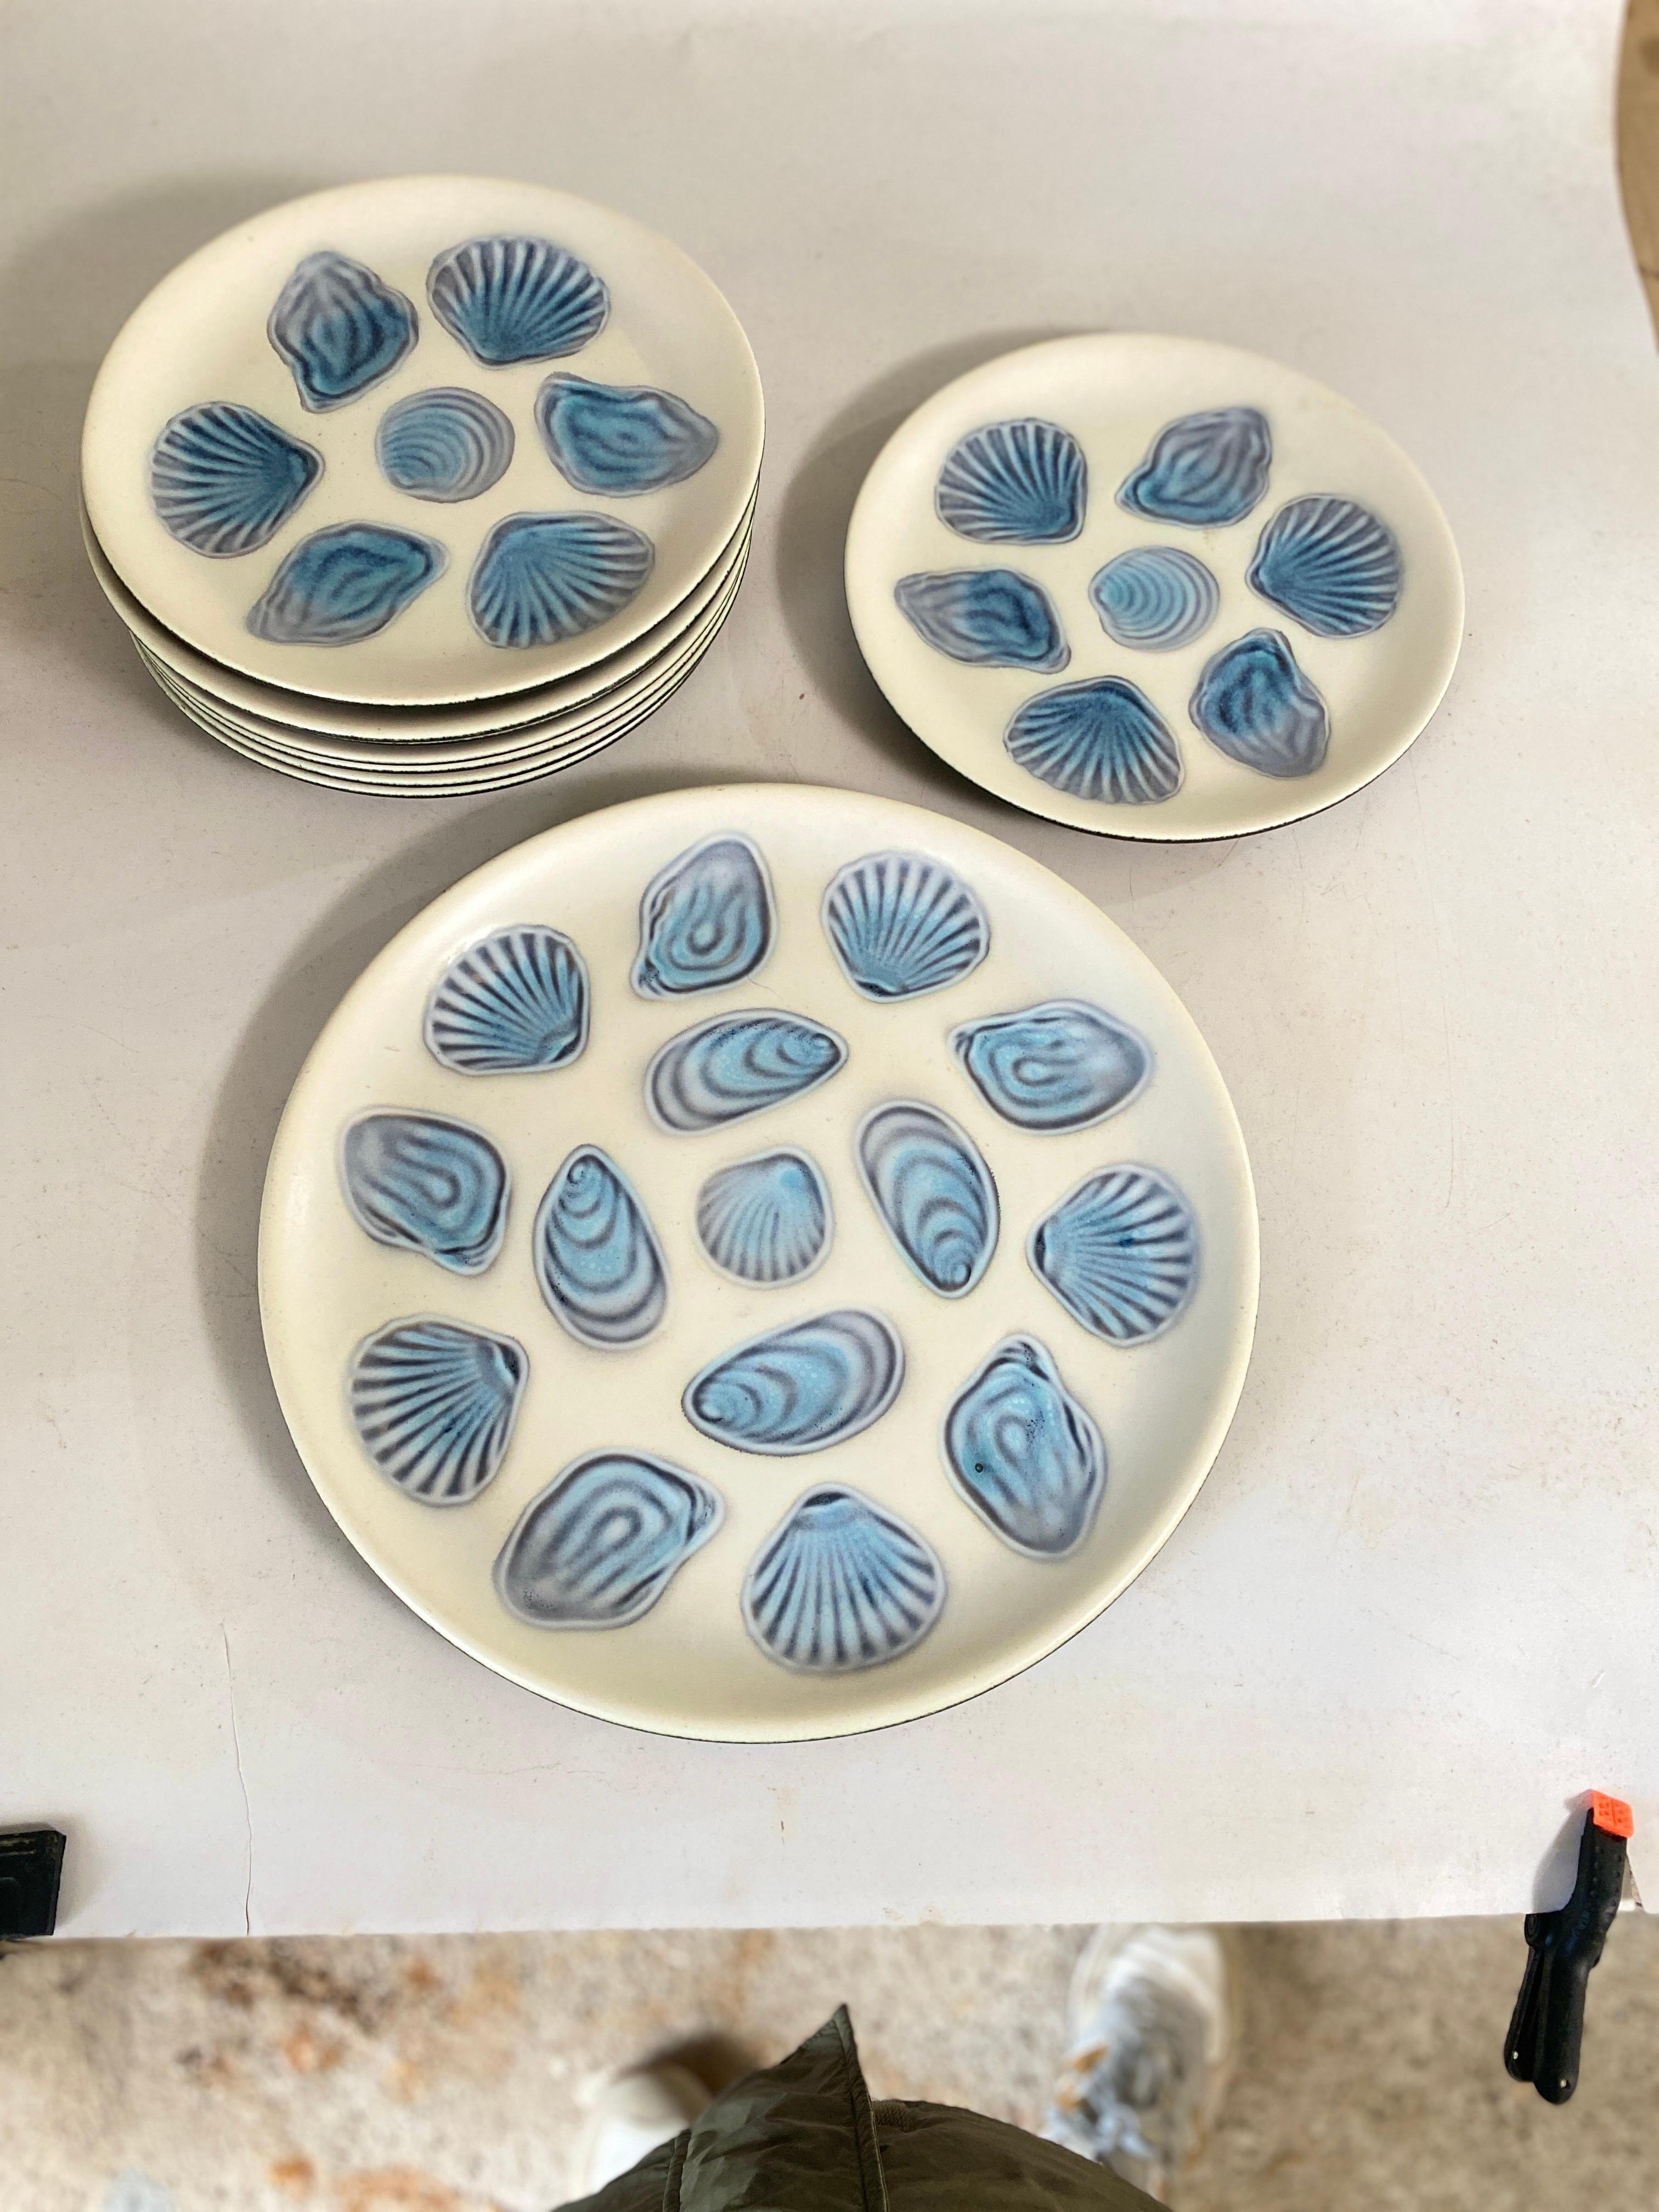 2 Large Oyster Plates and 6 Plates in Ceramic Blue and White France by Elchinger 6